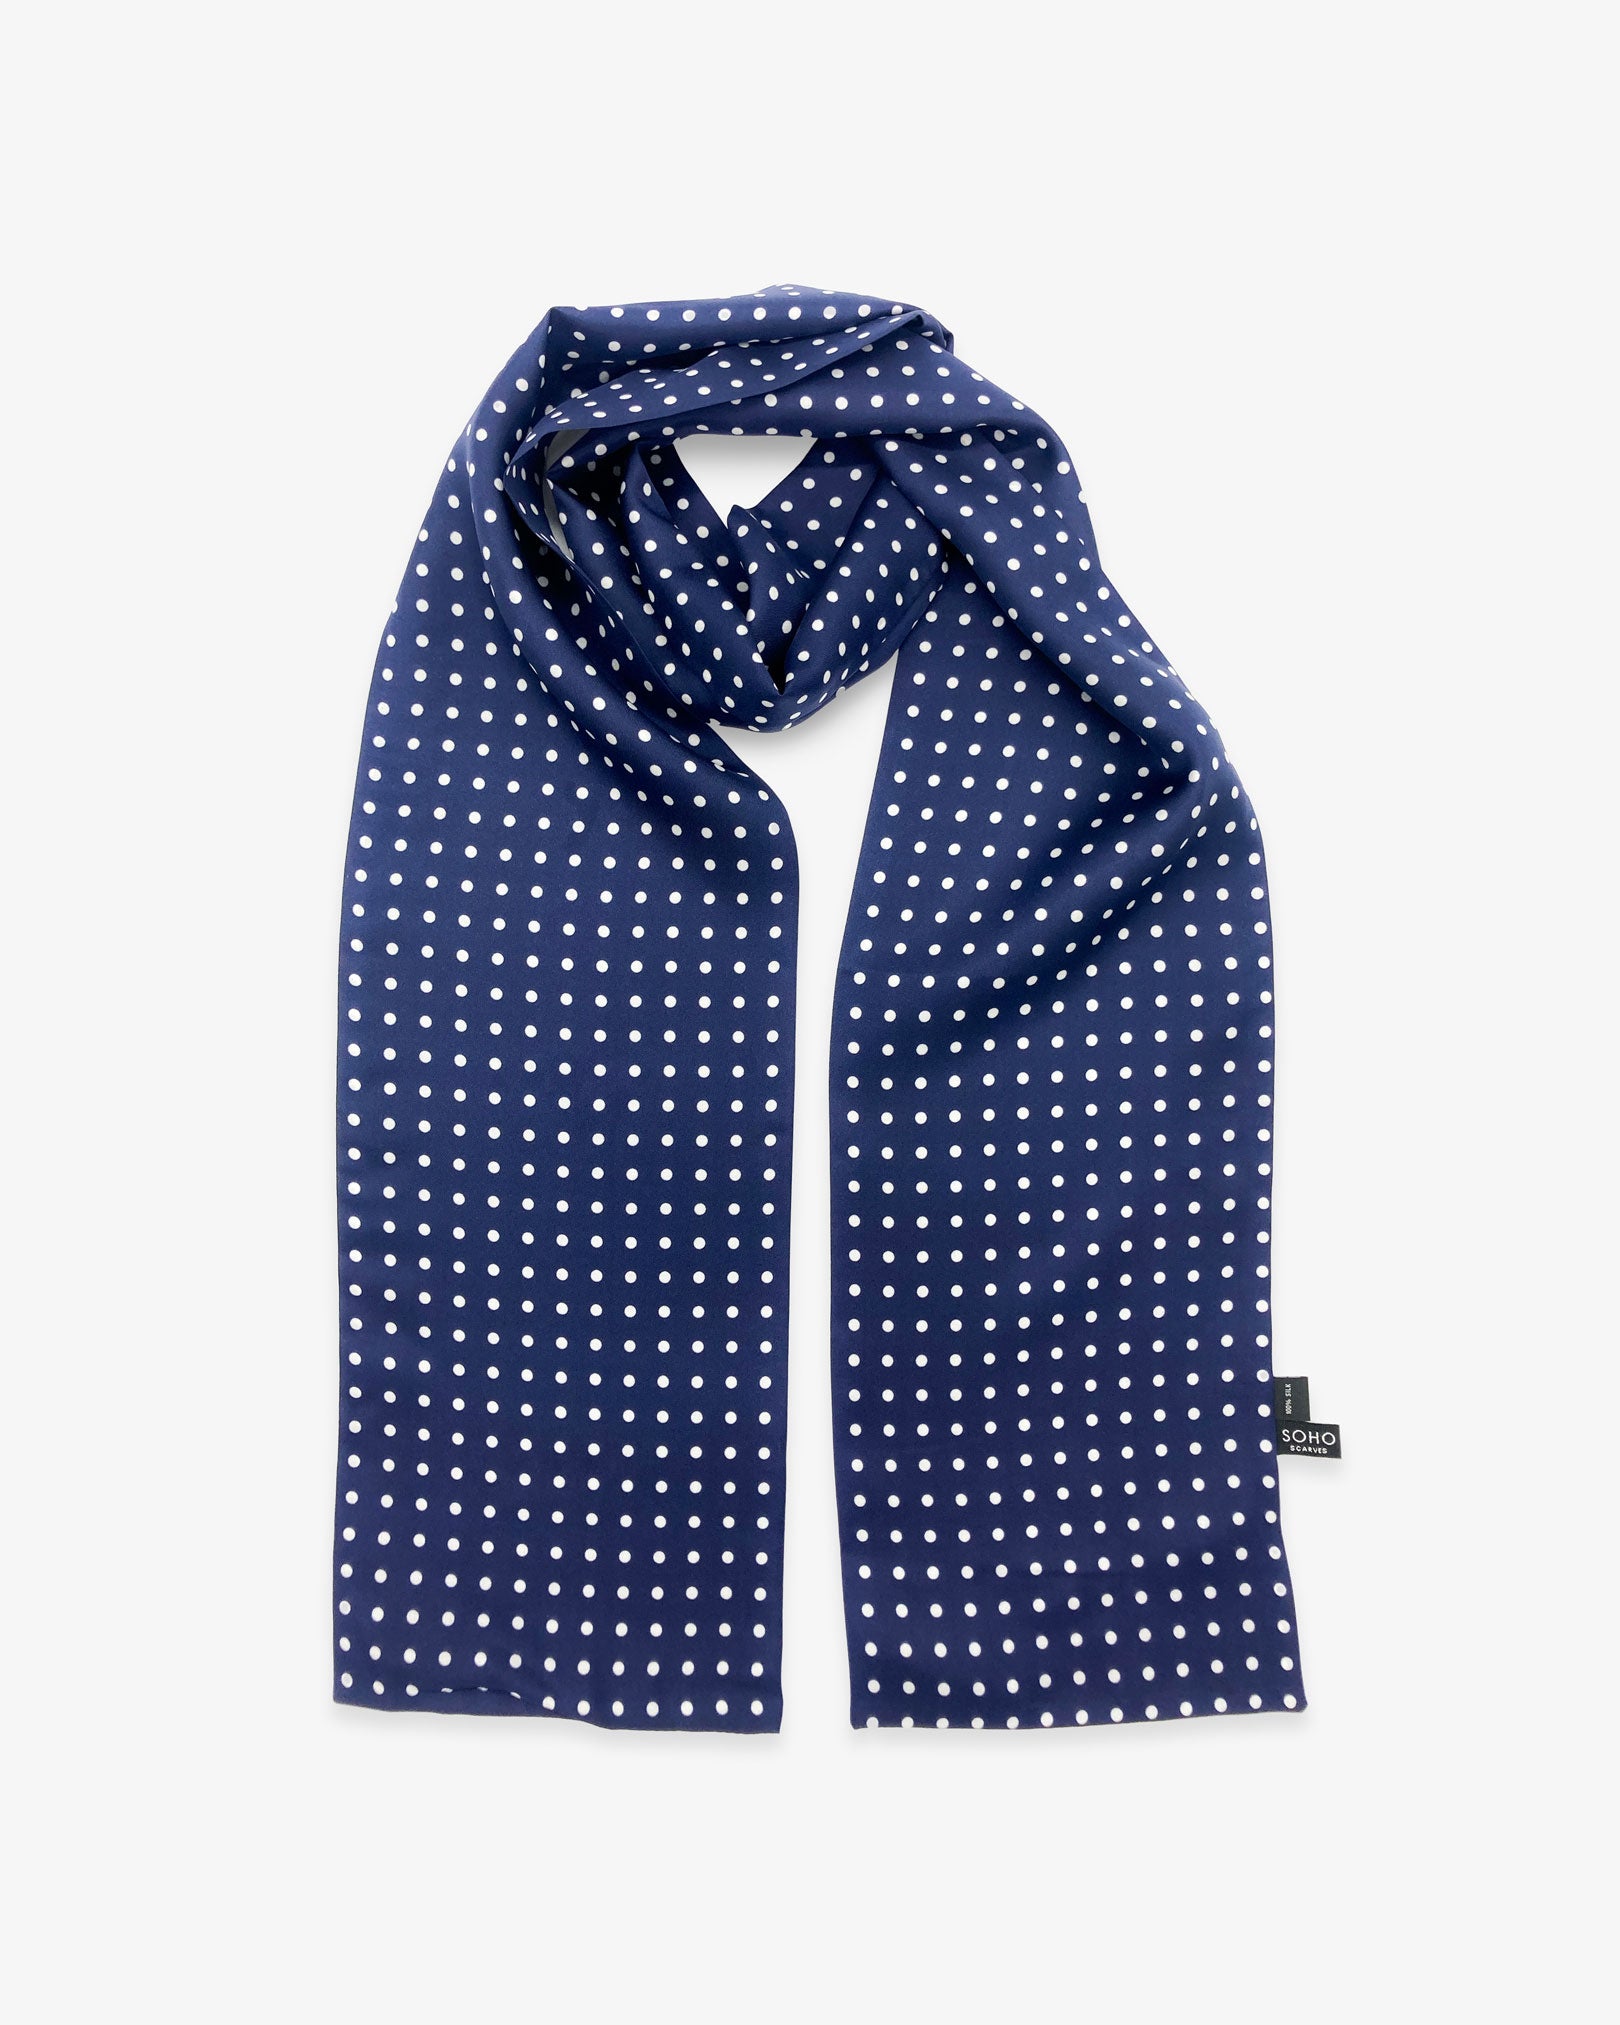 Looped view of the 'Westminster' silk scarf, clearly showing the timeless polka dot design in navy-blue with white spots.